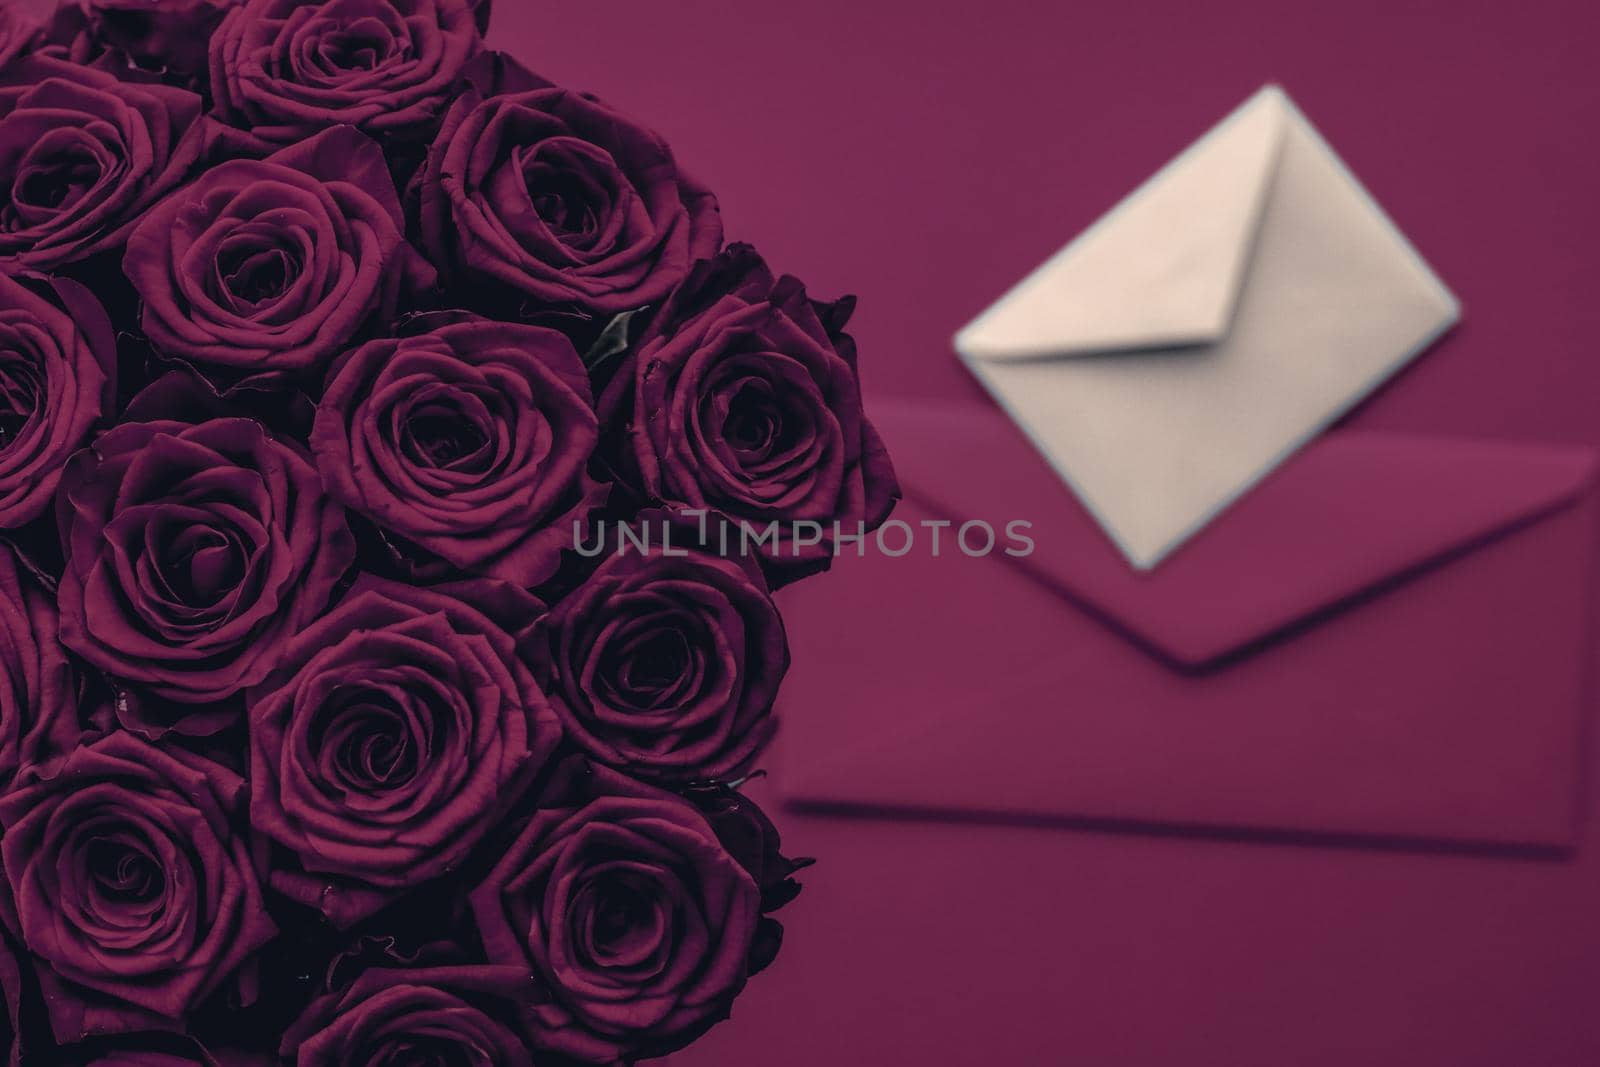 Holidays gift, floral present and happy relationship concept - Love letter and flowers delivery on Valentines Day, luxury bouquet of roses and card on wine background for romantic holiday design